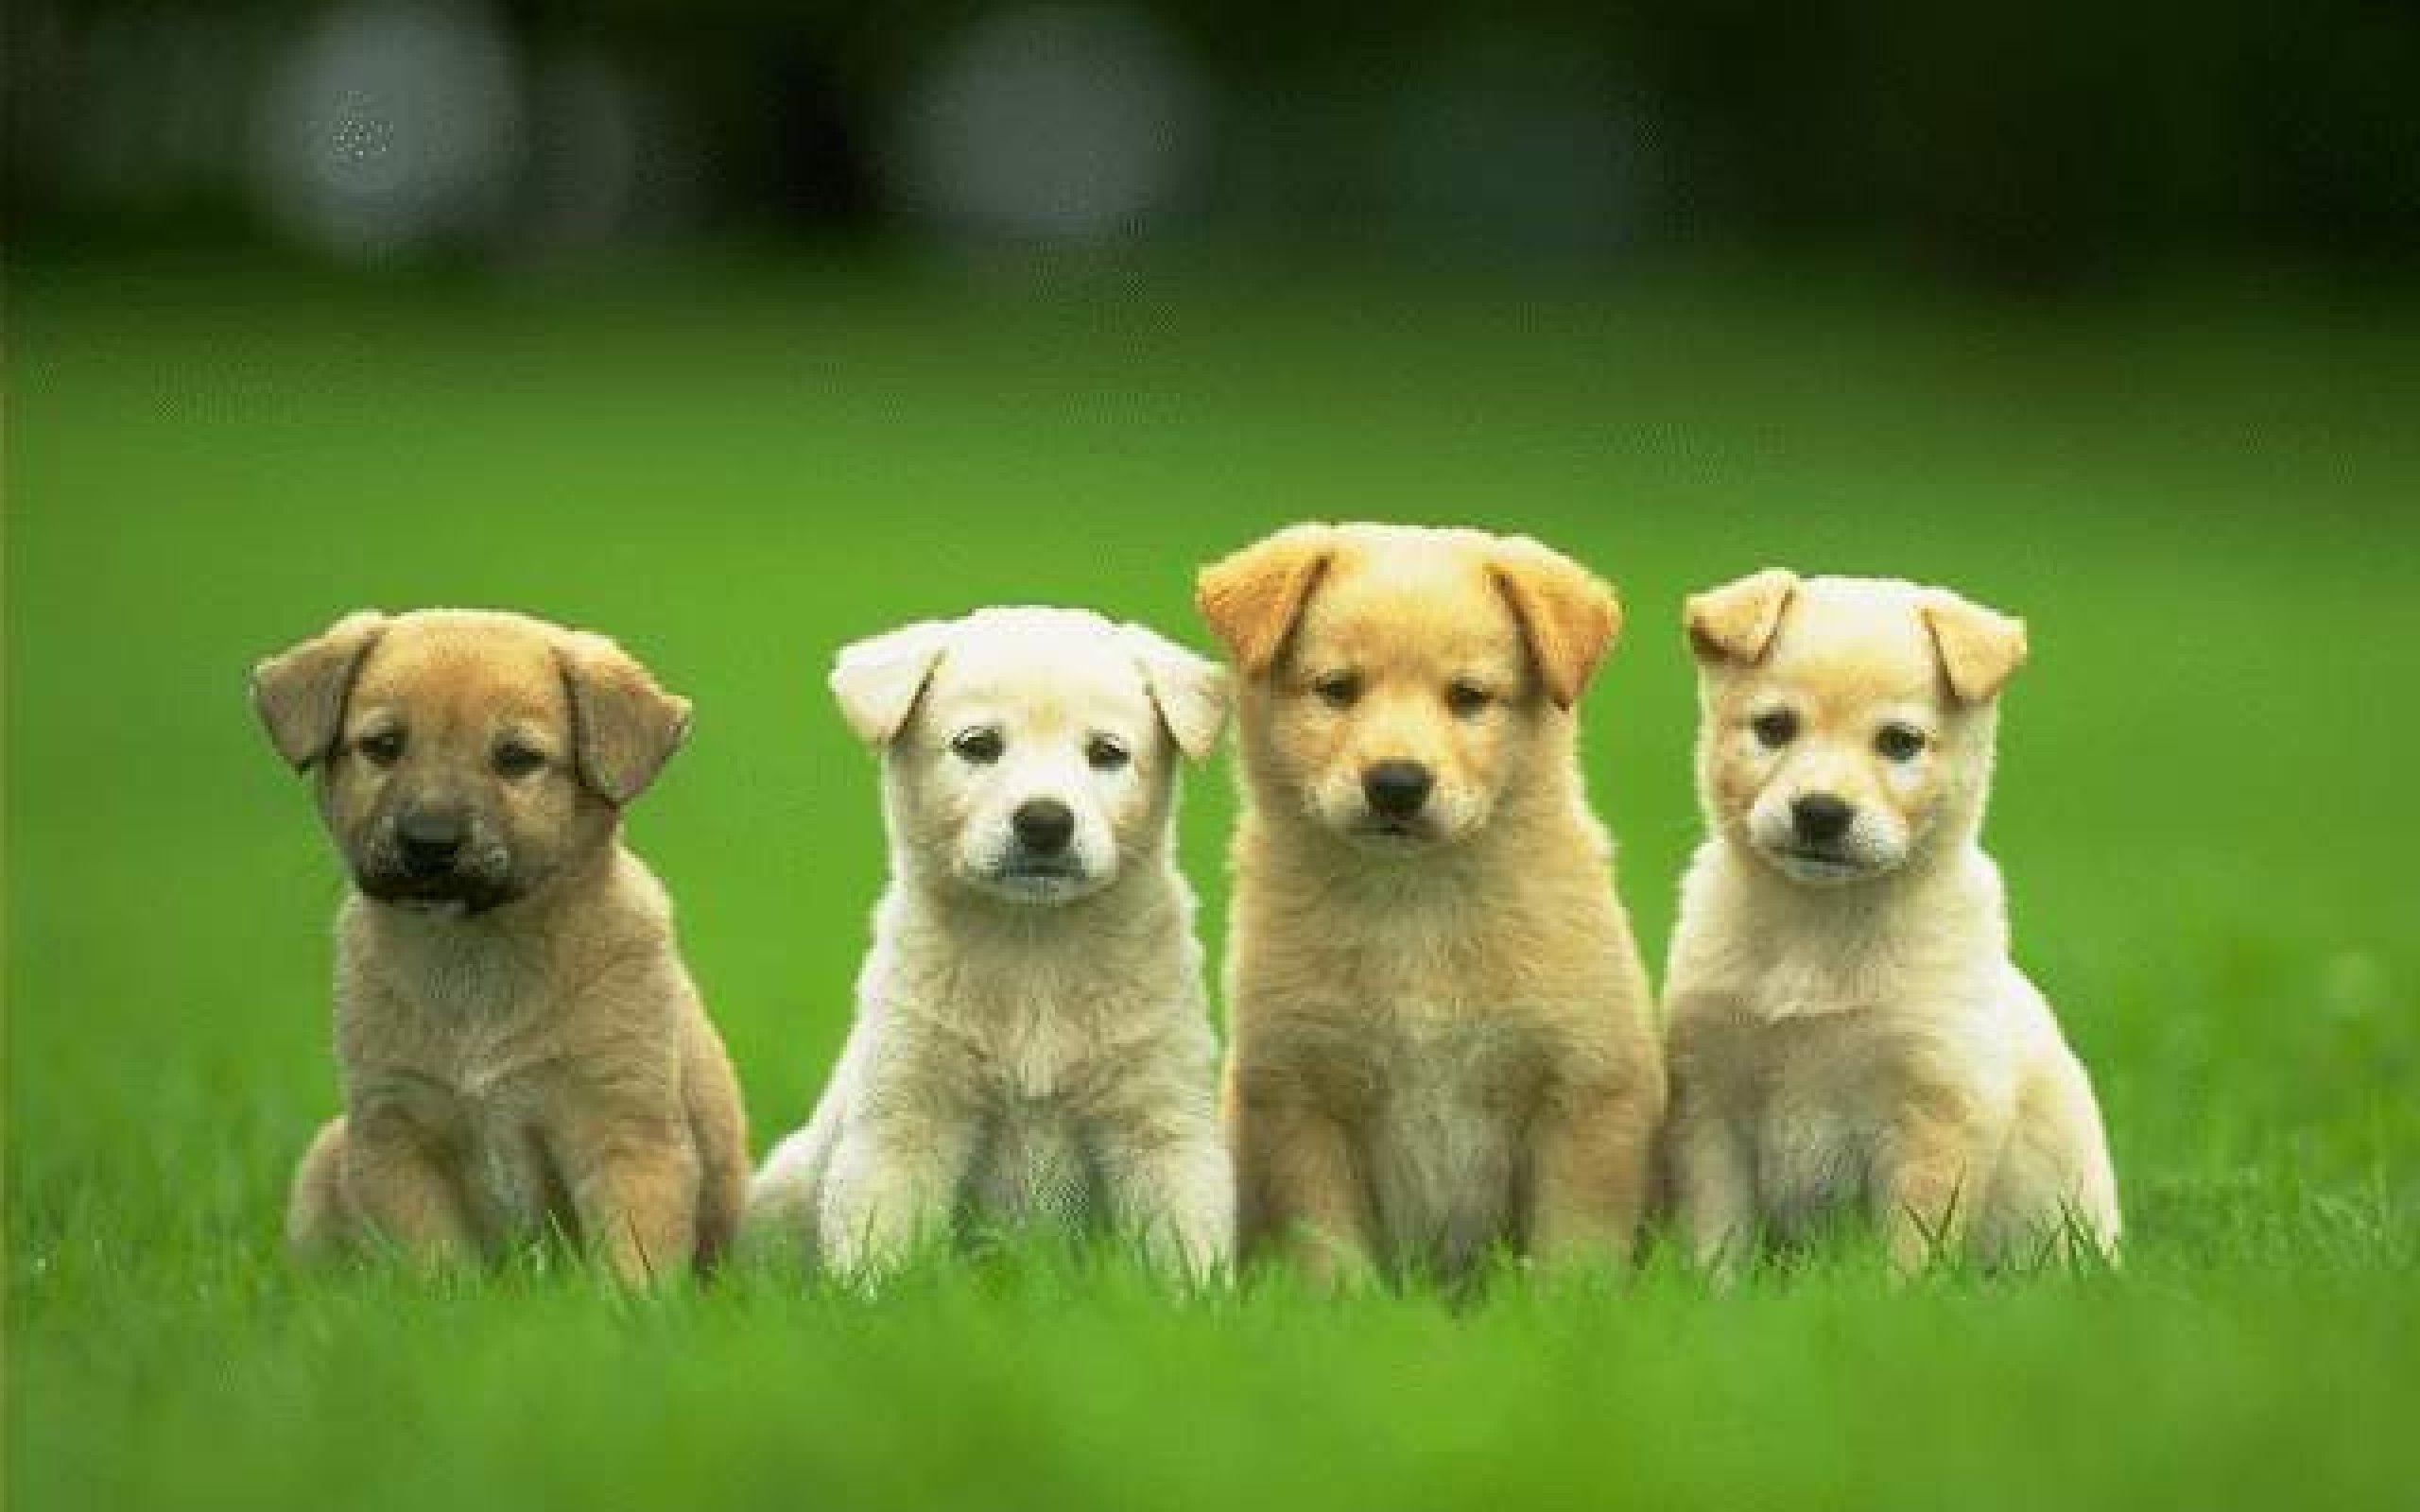 Cute Dog Background Earthly Wallpaper 1080p